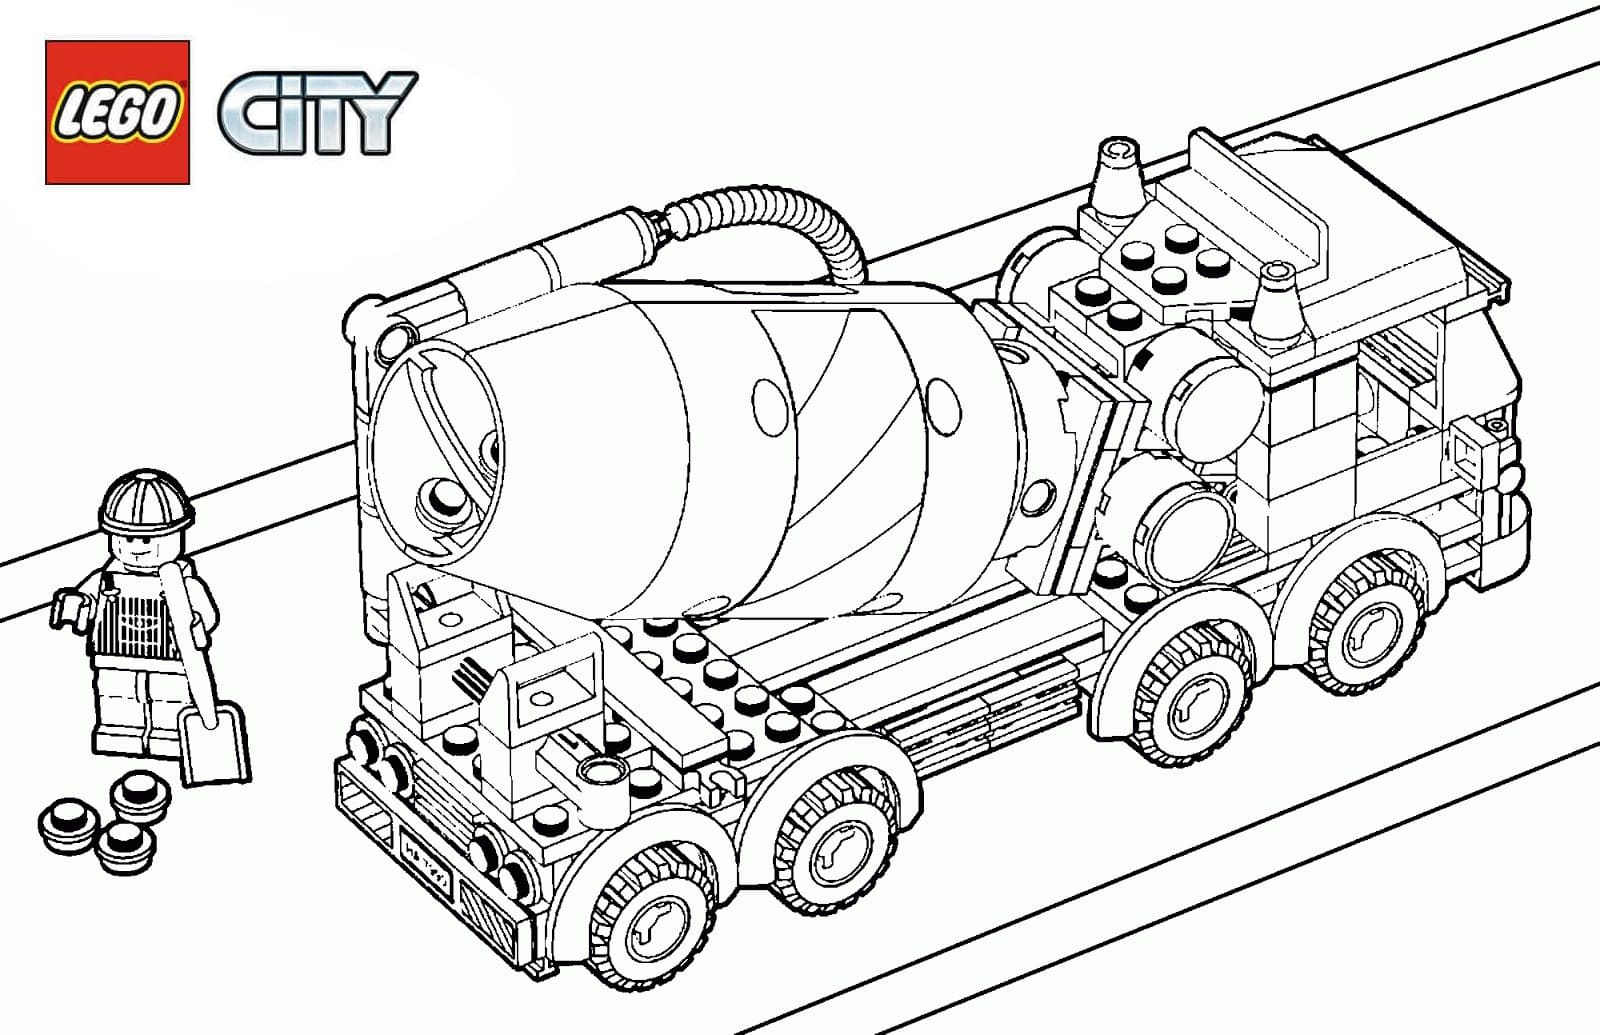 Fairytale lego city coloring page